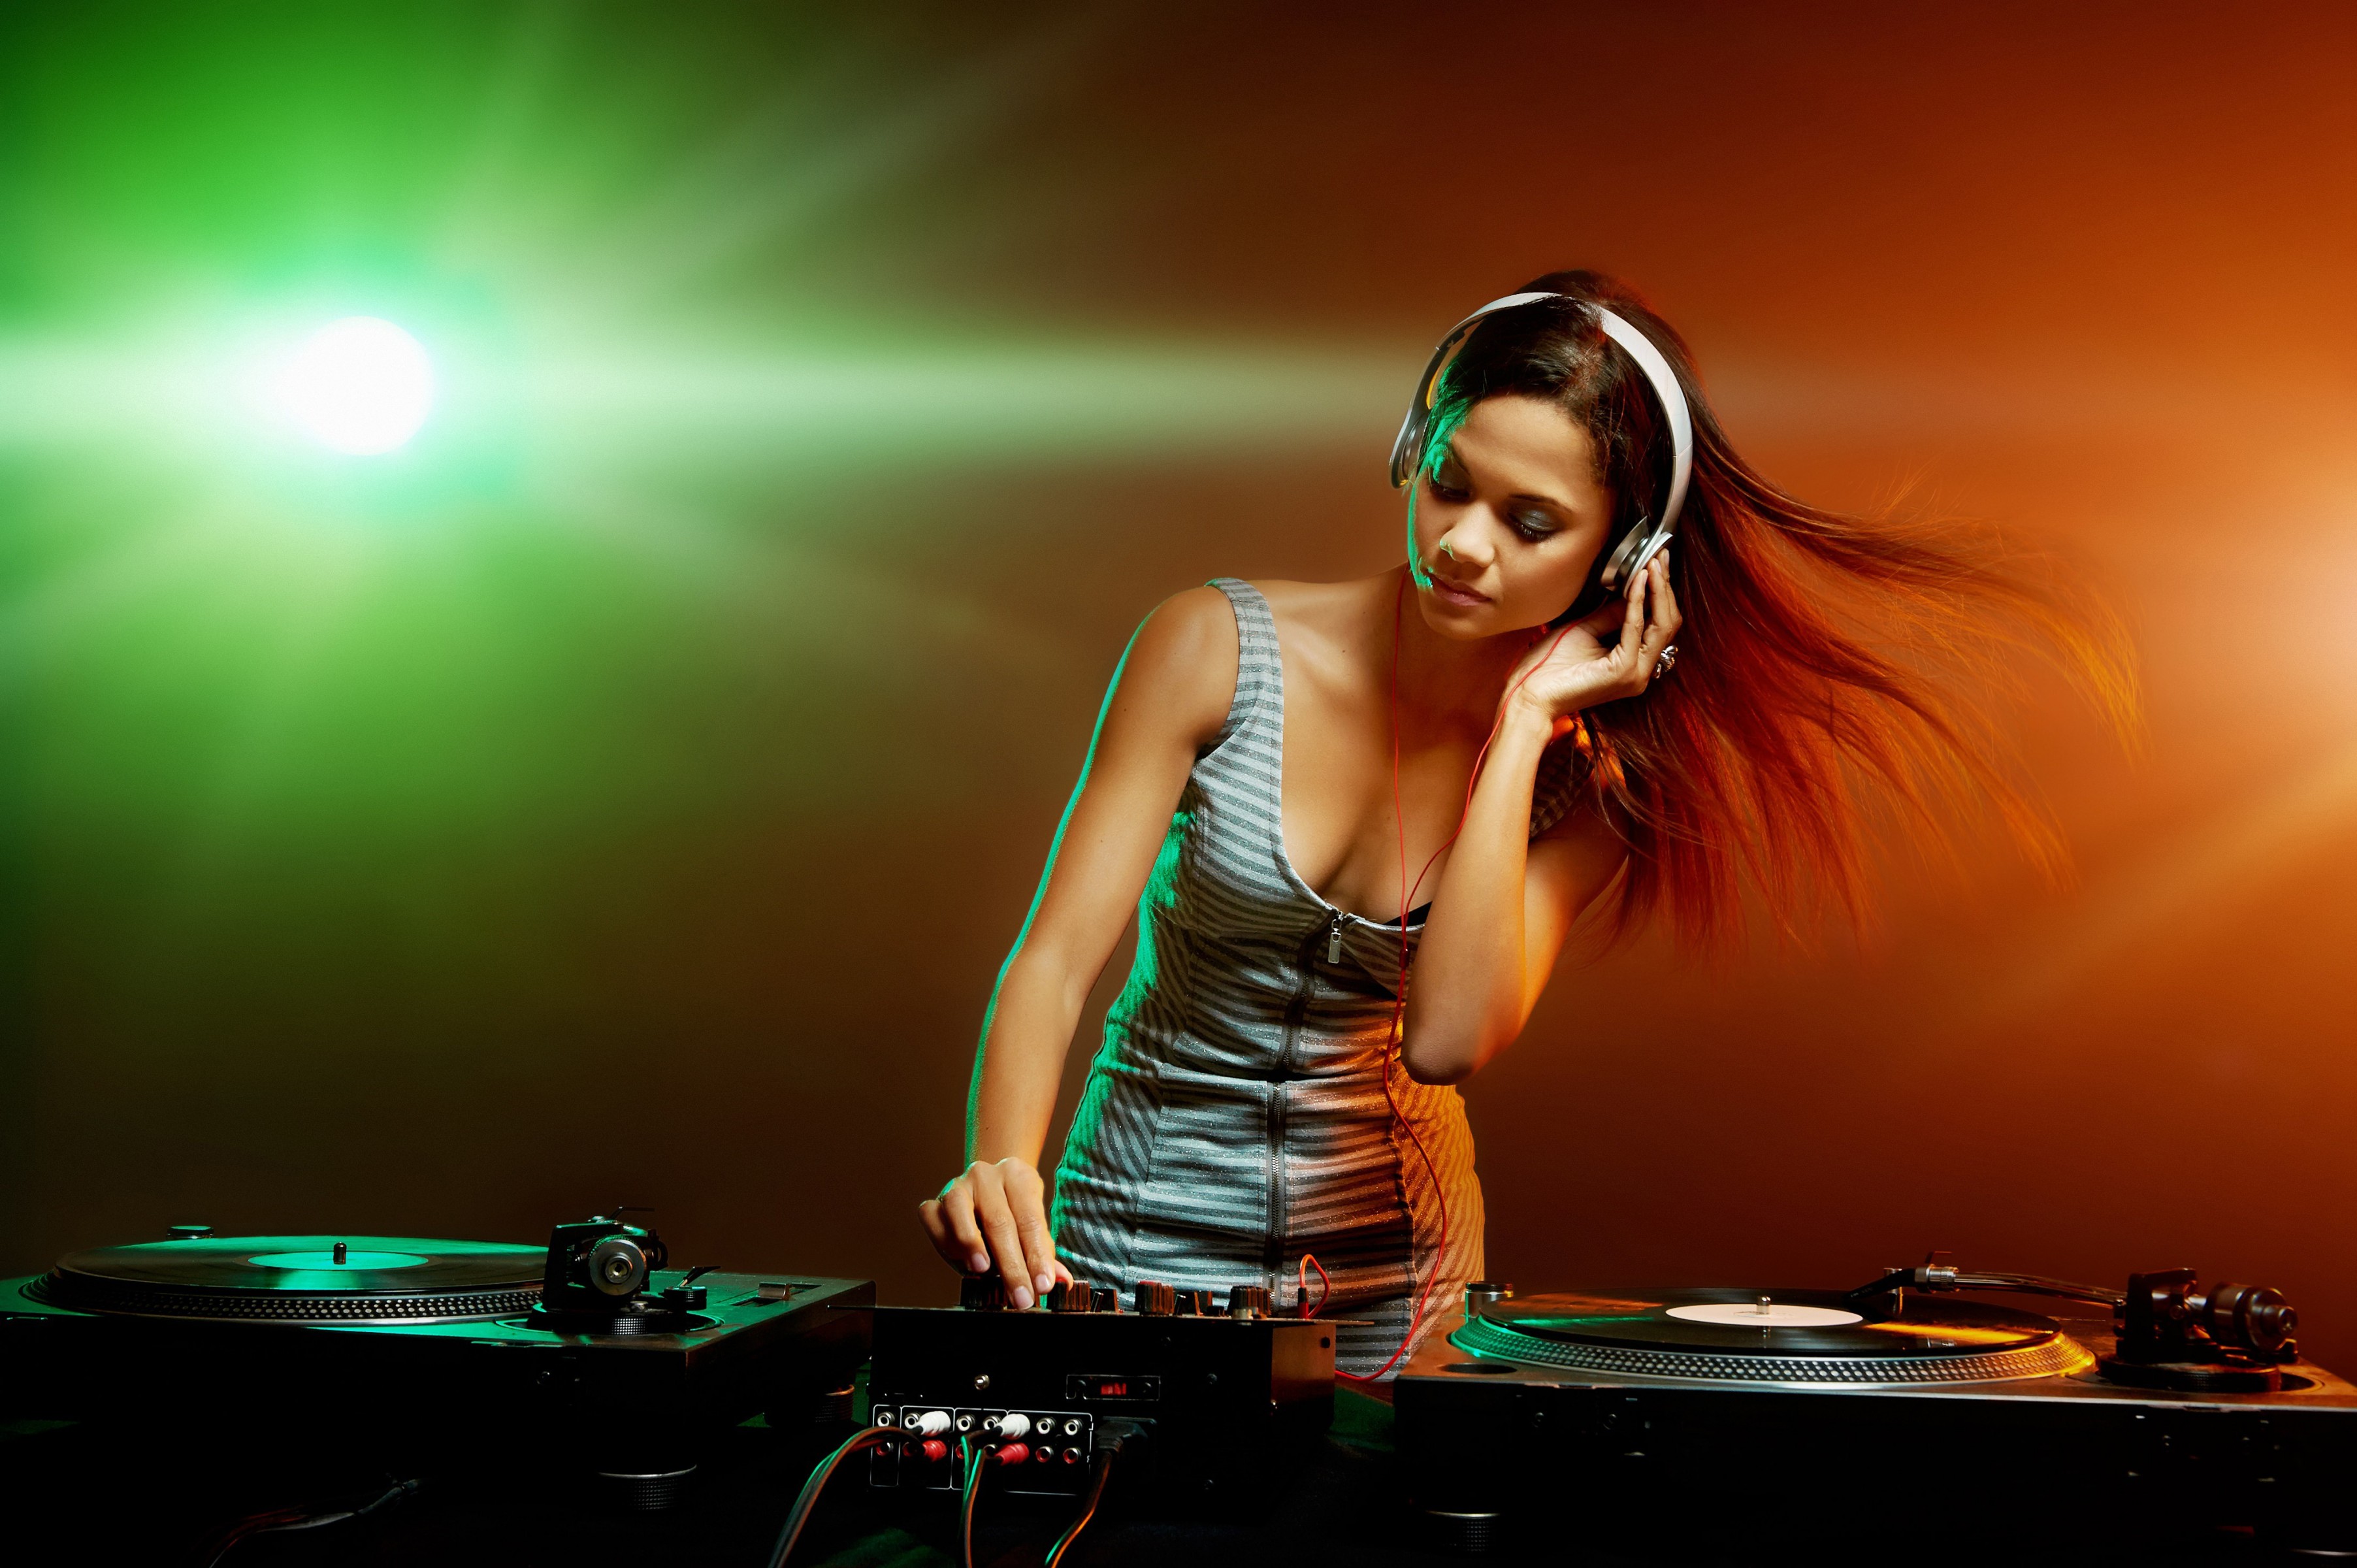 DJ Party Music Girl 4k wallpapers.